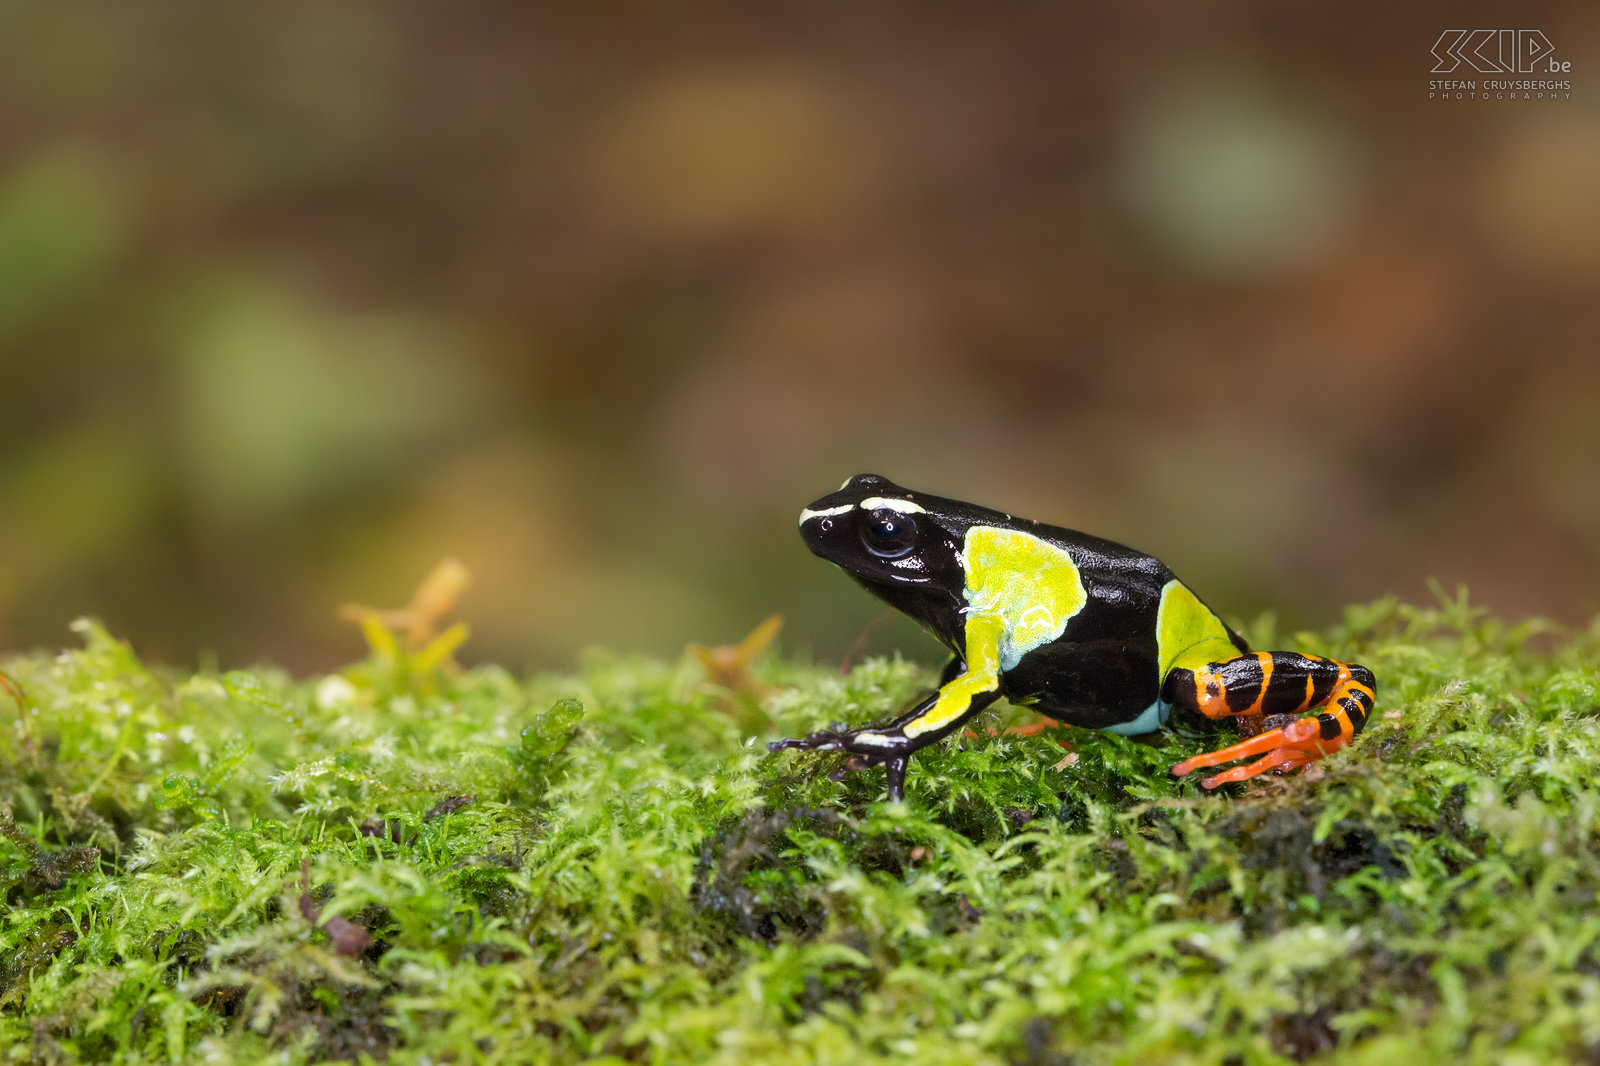 Mantadia - Mantella baroni frog The Mantella baroni is a small (2-3cm) black frog with patches of bright green and orange colors. This frog eats small insects like ants, beetles, … and it skin is toxic to predators. Stefan Cruysberghs